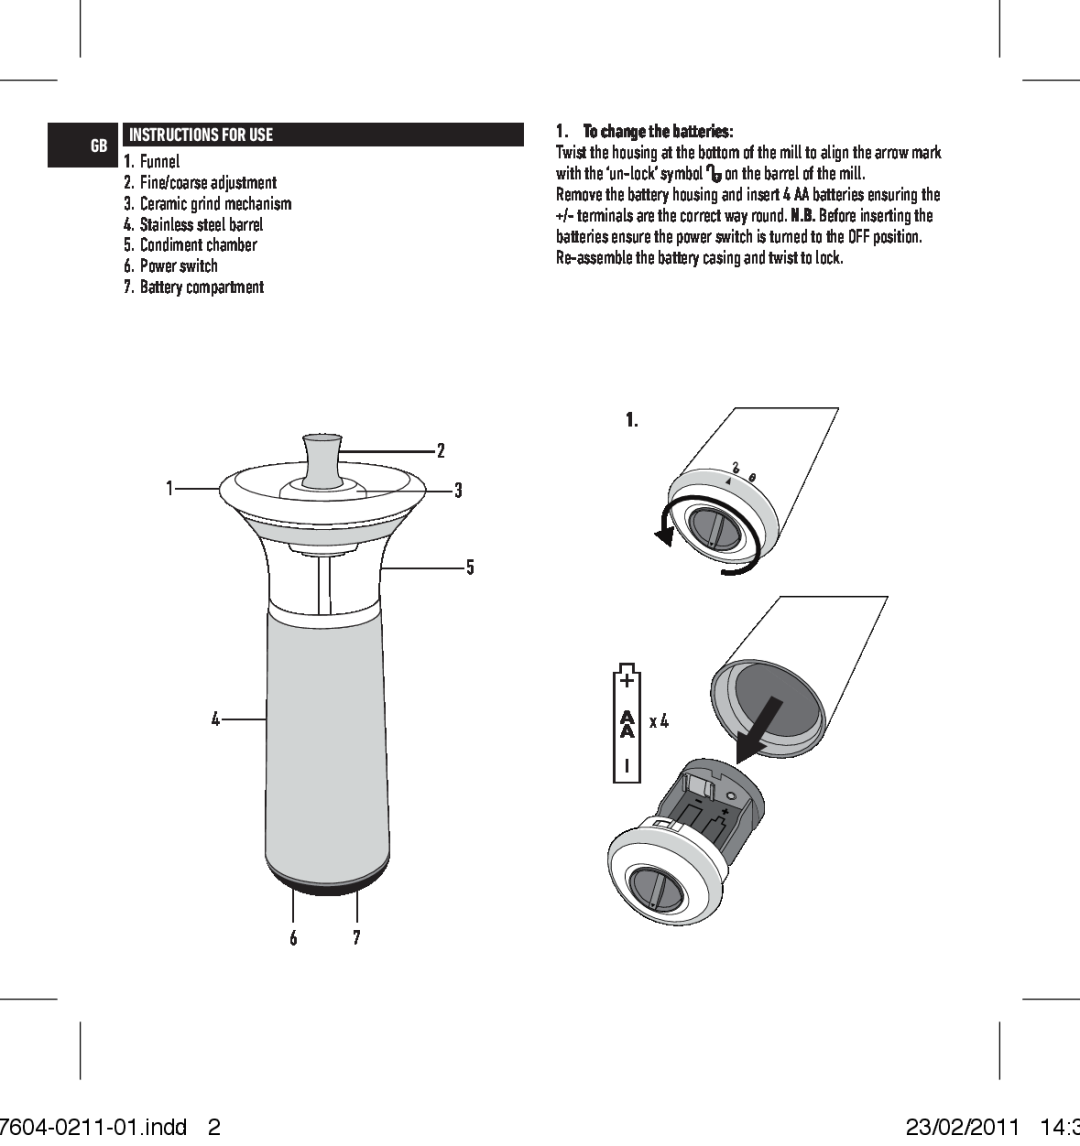 Salter Housewares 7604-0211-01 indd, 23/02/2011, Instructions for use, Funnel, Fine/coarse adjustment, Condiment chamber 